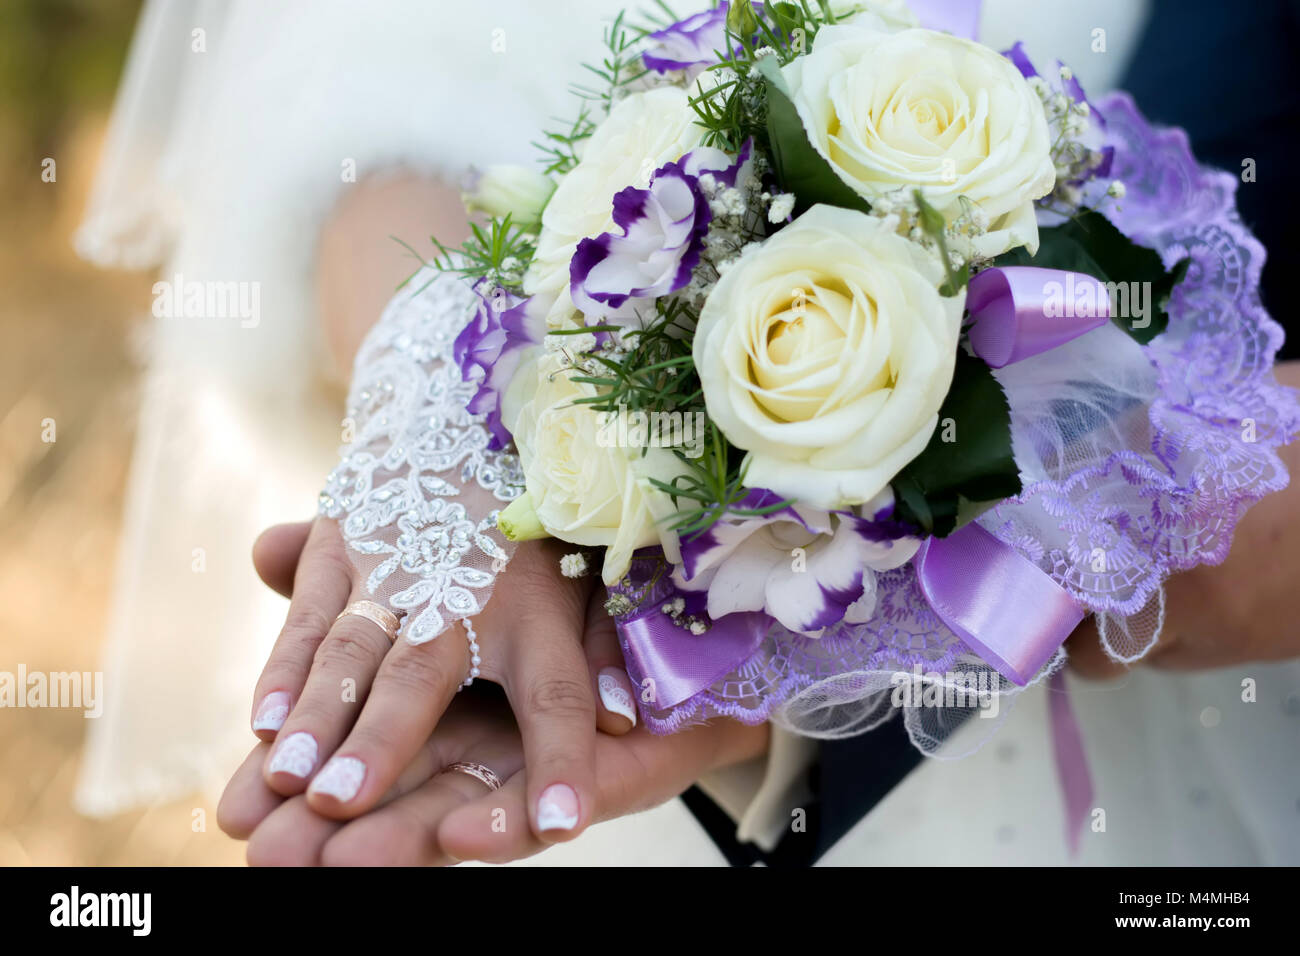 flower, bouquet, love, day, valentine, marriage, background, hymeneal, rings, decoration, concept, holiday, object, celebration, creative, gold, couple, engagement, Stock Photo